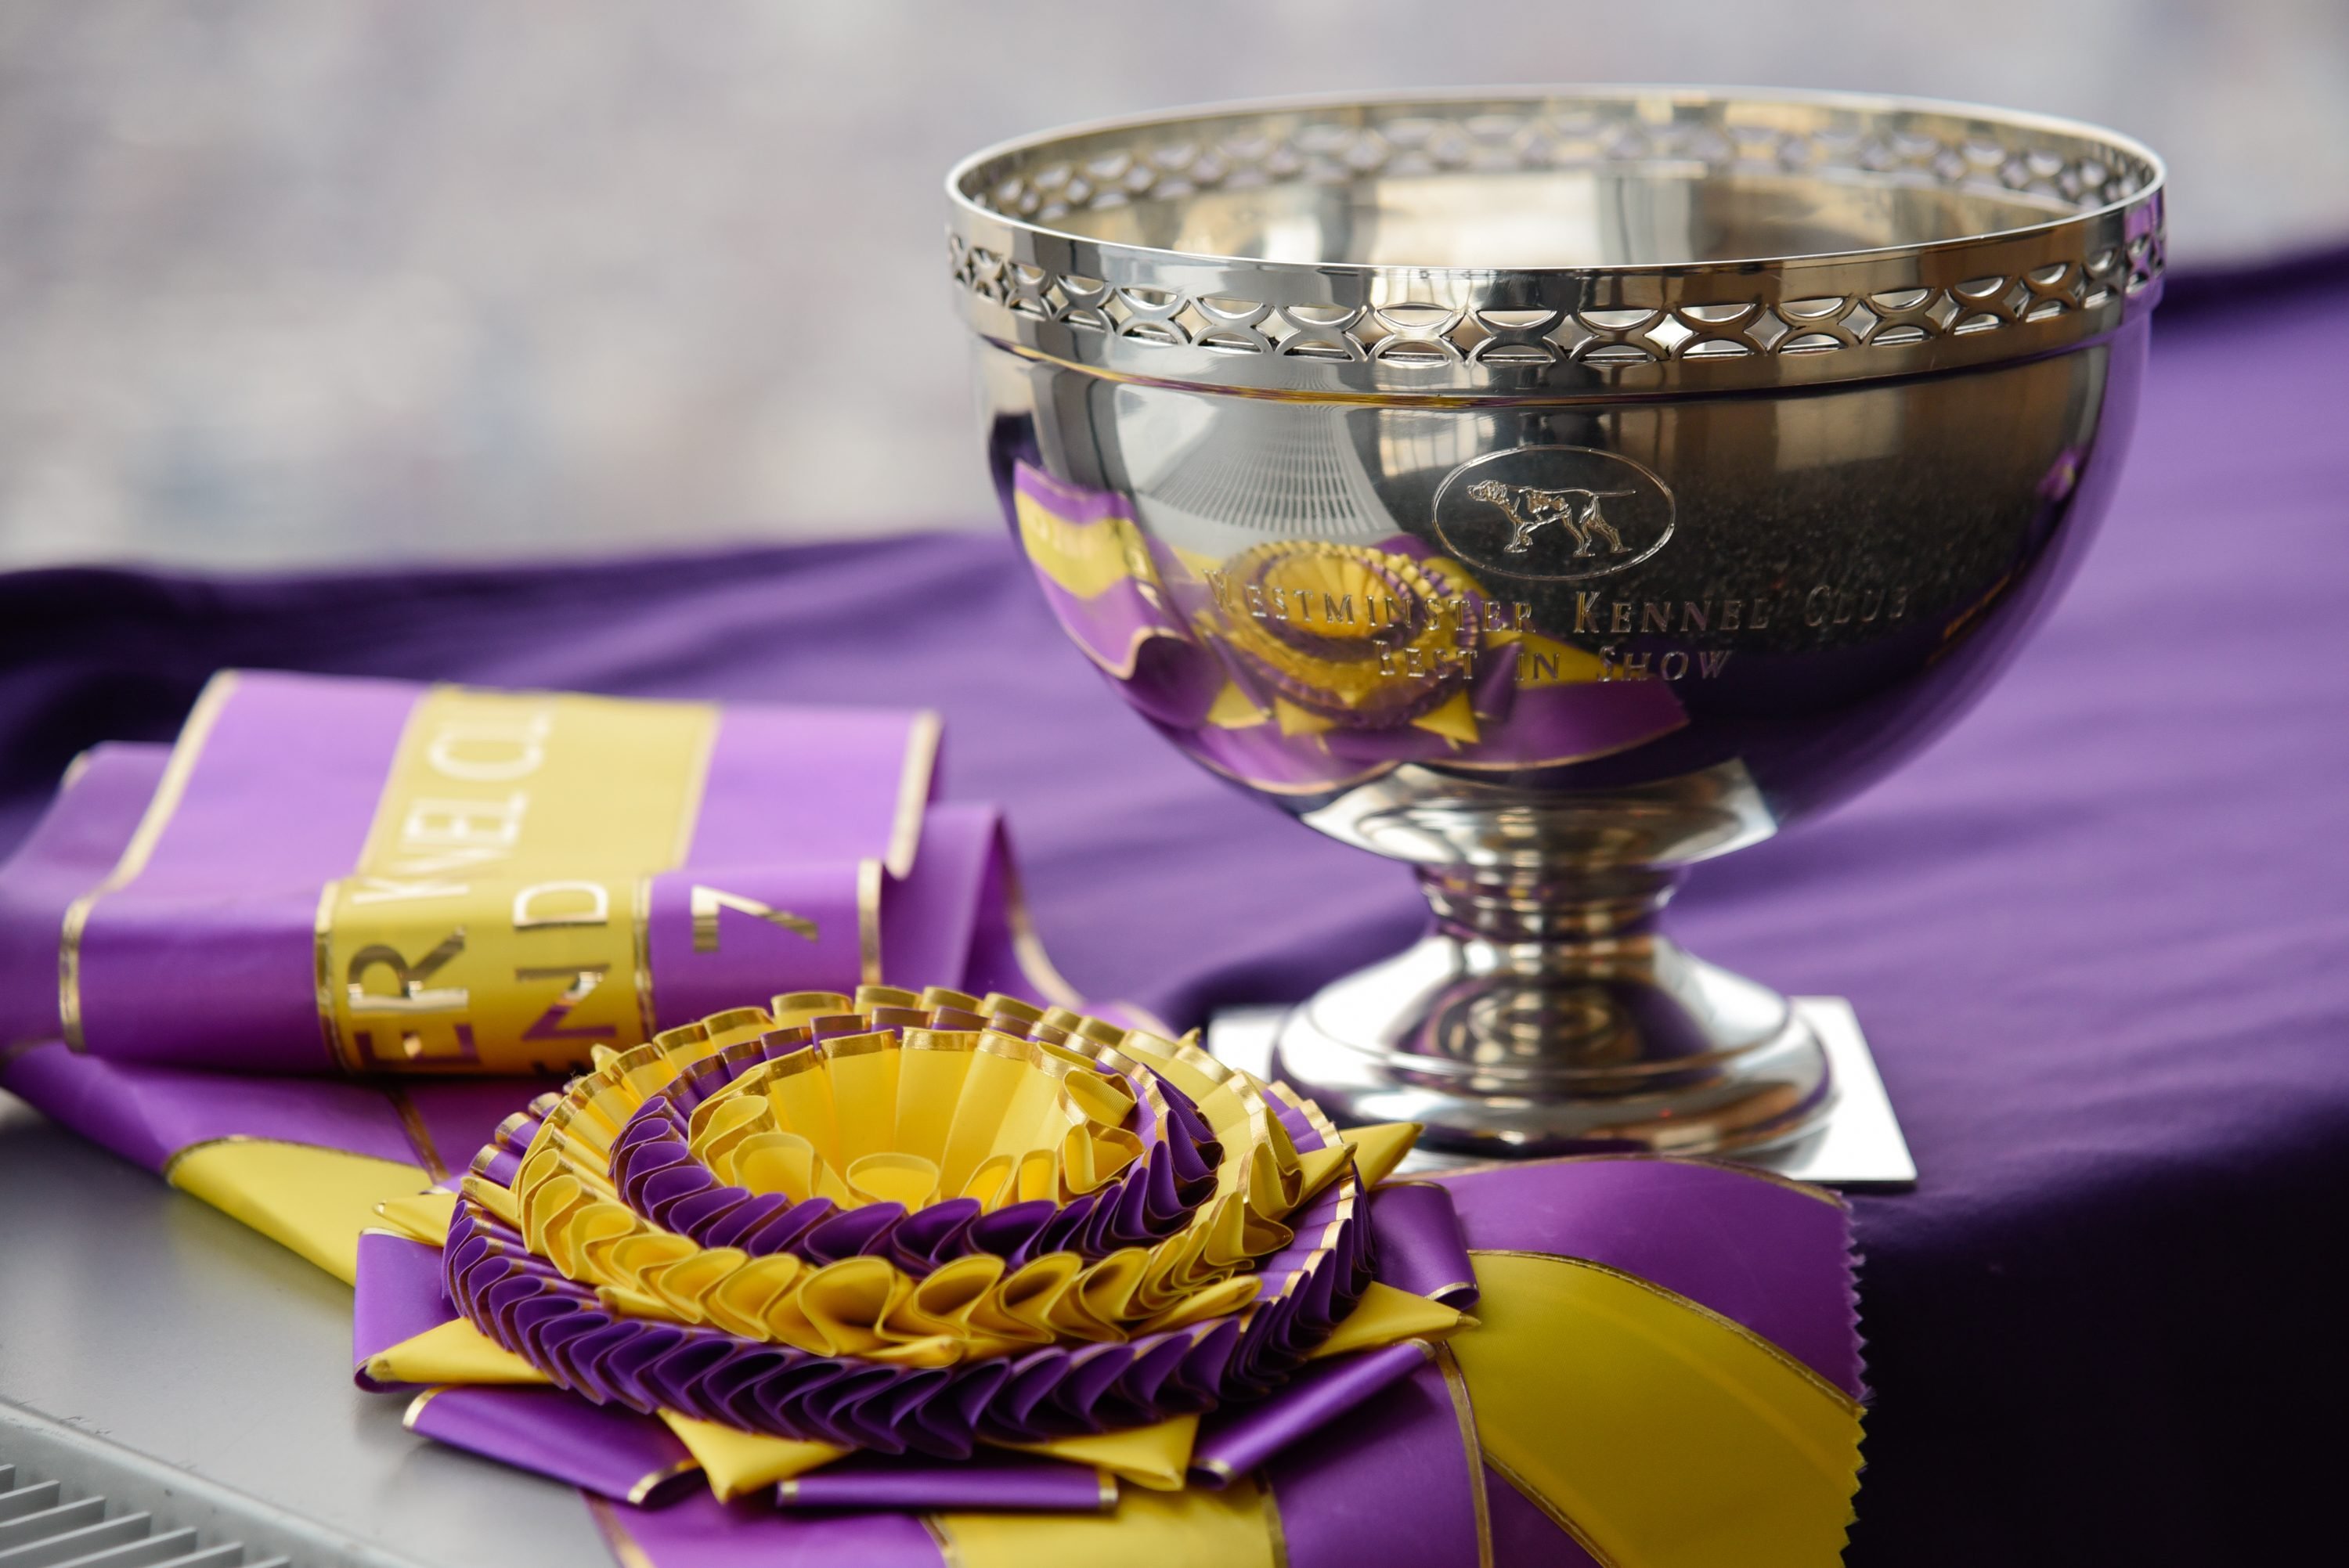 Westminster Kennel Club Dog Show 'Best In Show' Trophy 